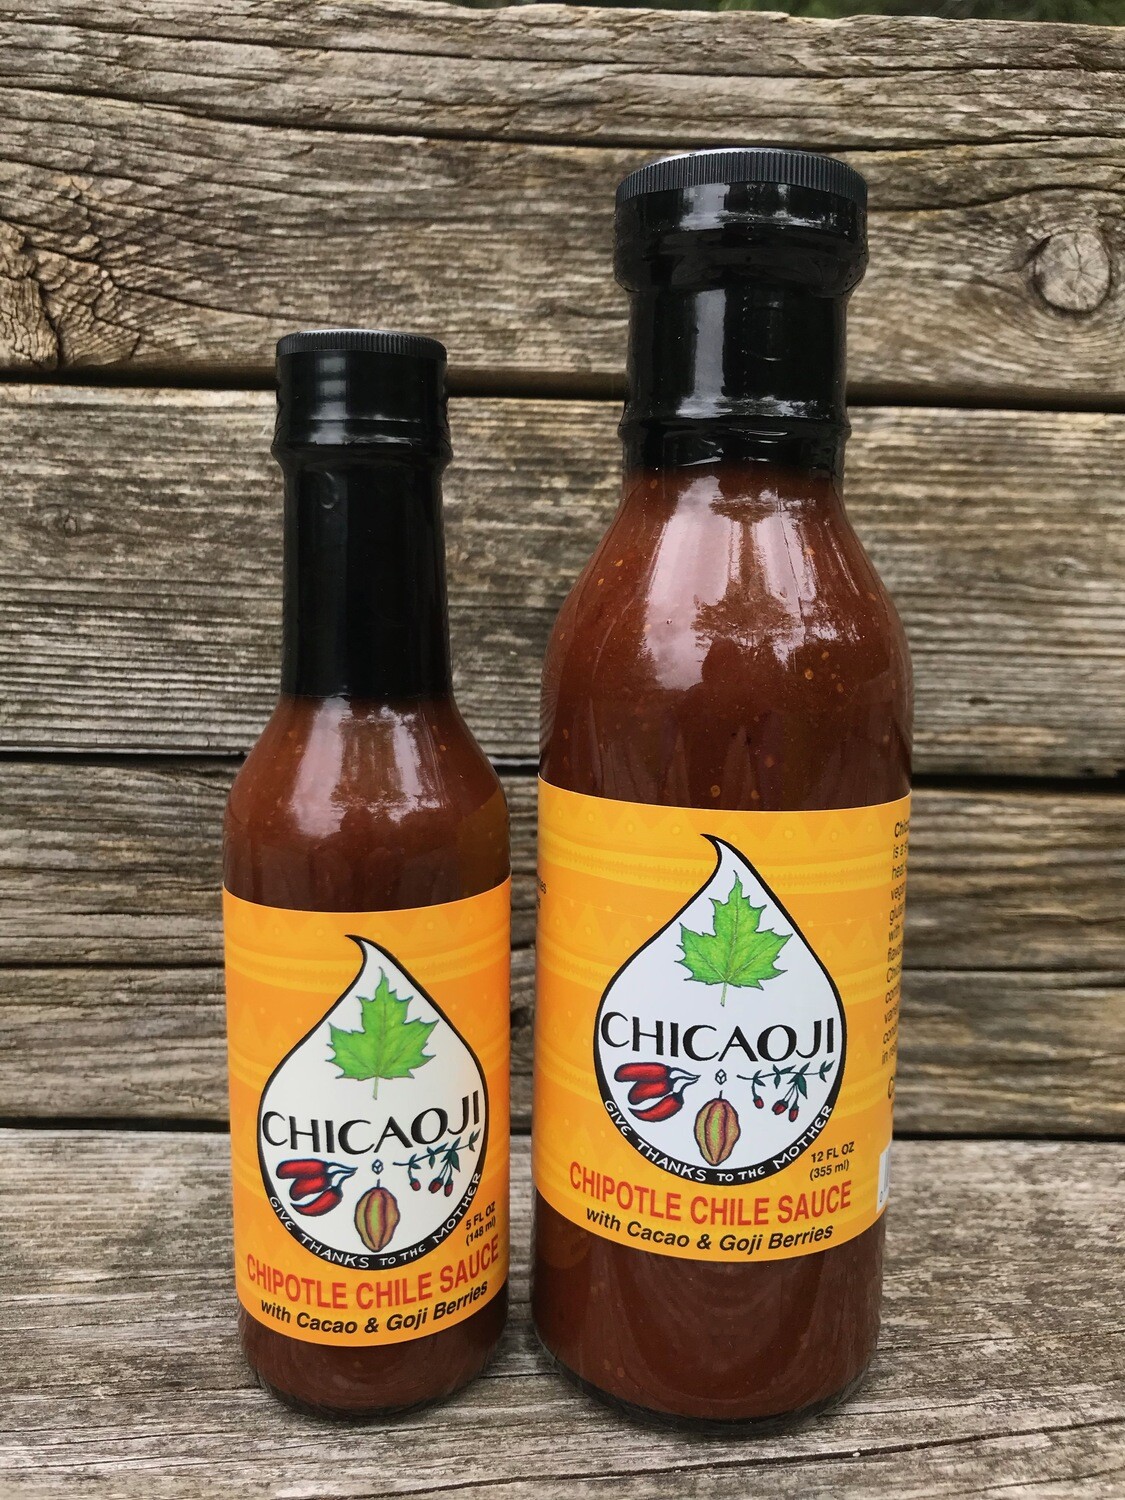 5 oz & 12 oz Bottles of Chicaoji, $10 Flat rate shipping